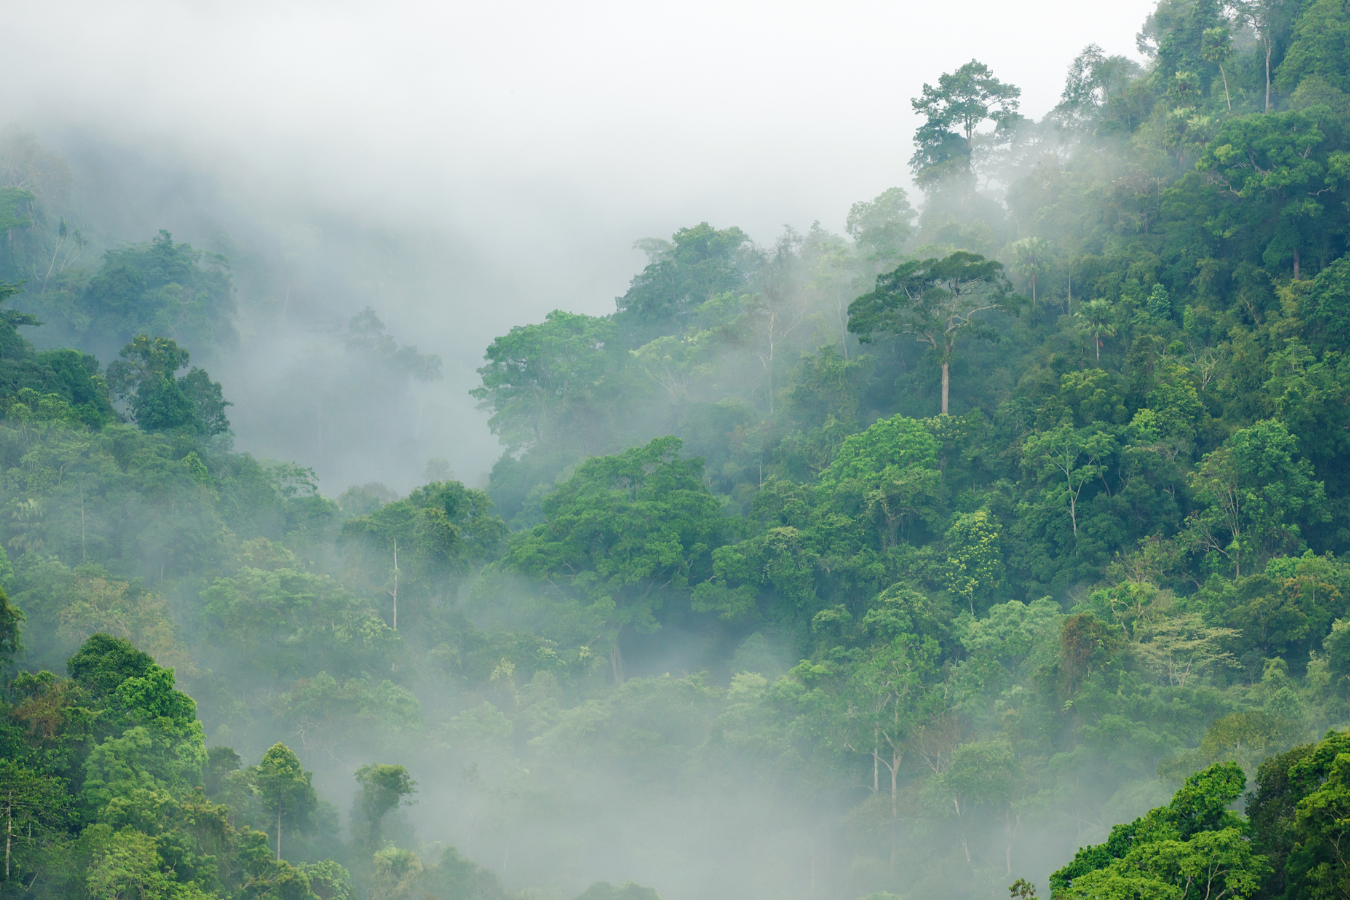 Rainforests and why they are important - The Living Rainforest